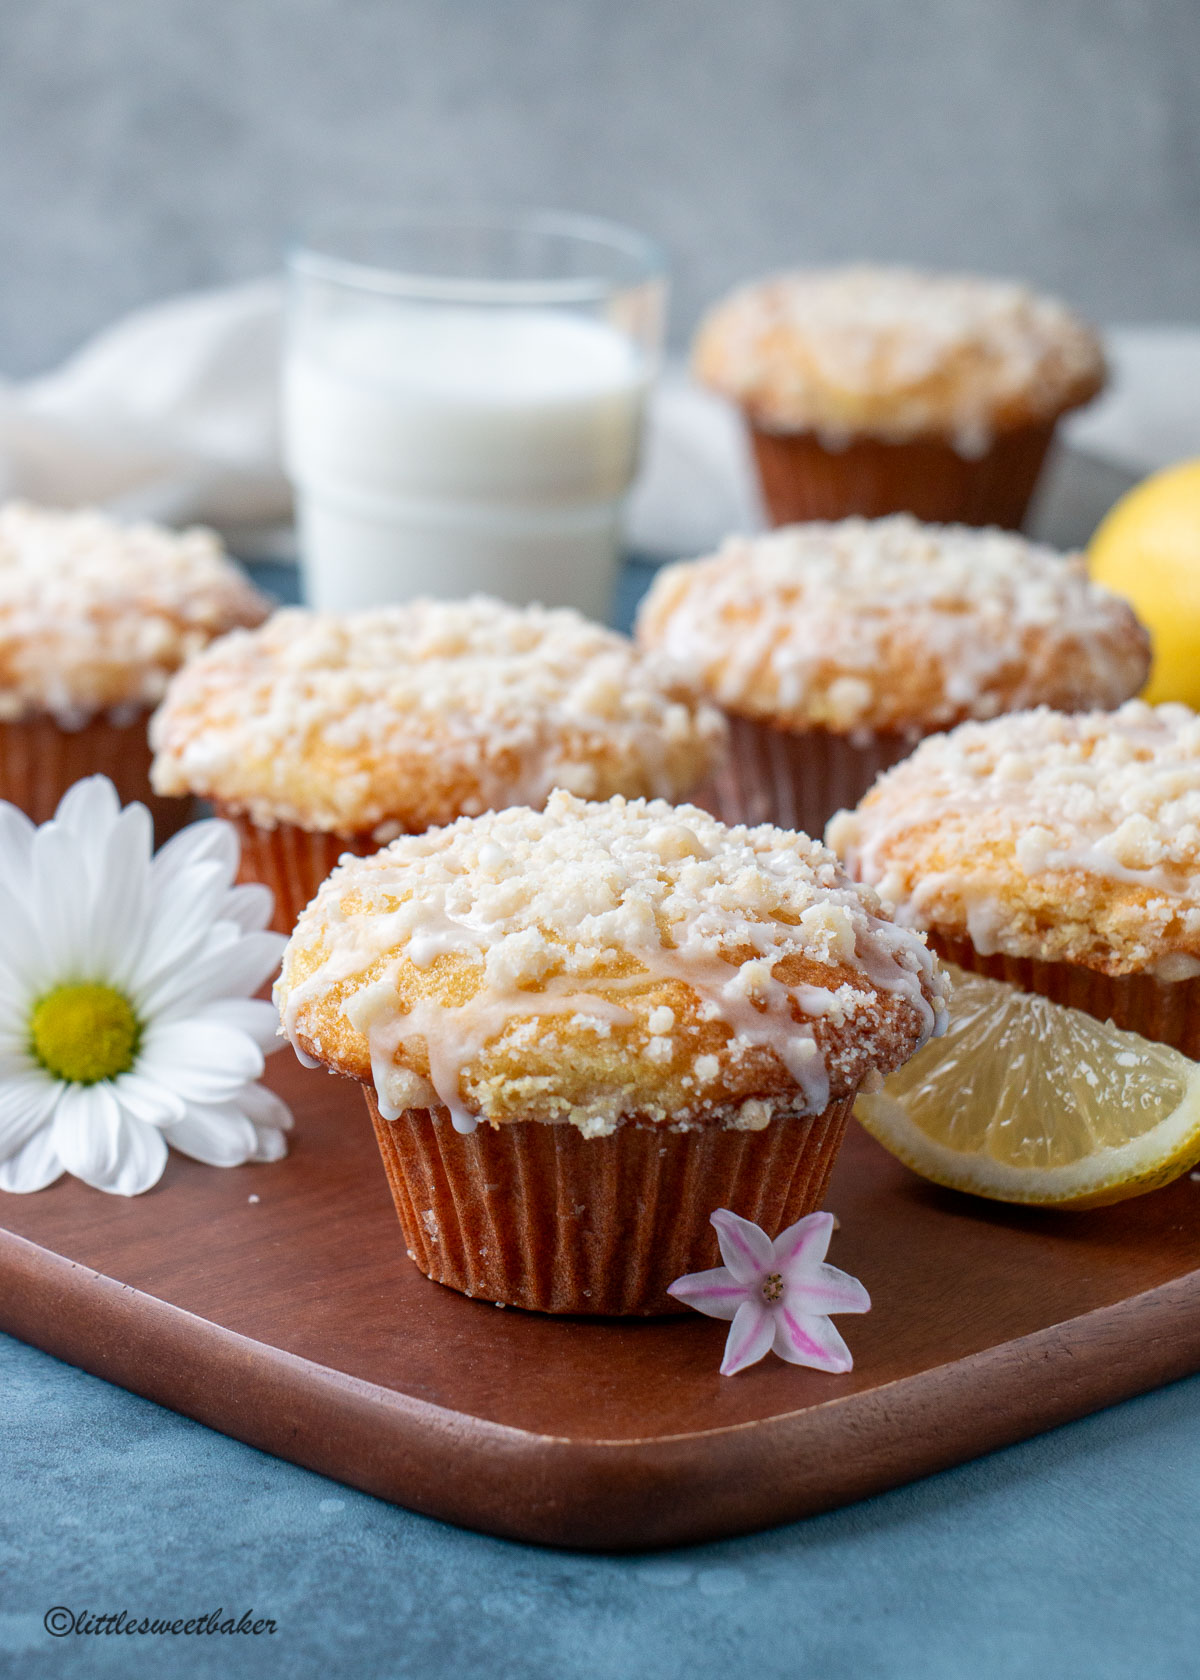 A bakery-style lemon muffins with crumb topping and glaze on a wooden board.